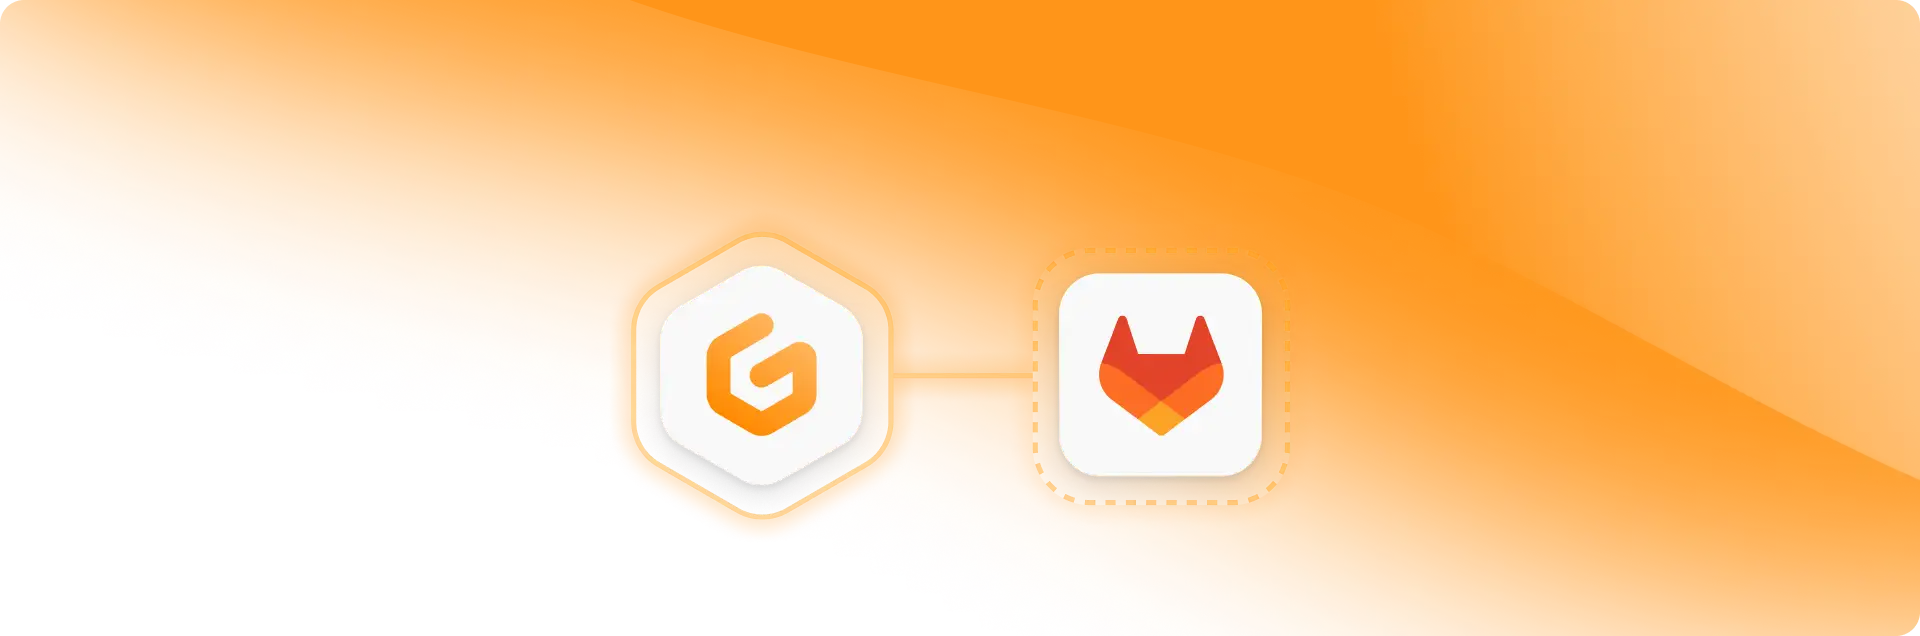 Create self-service preview environments with Gitpod and GitLab